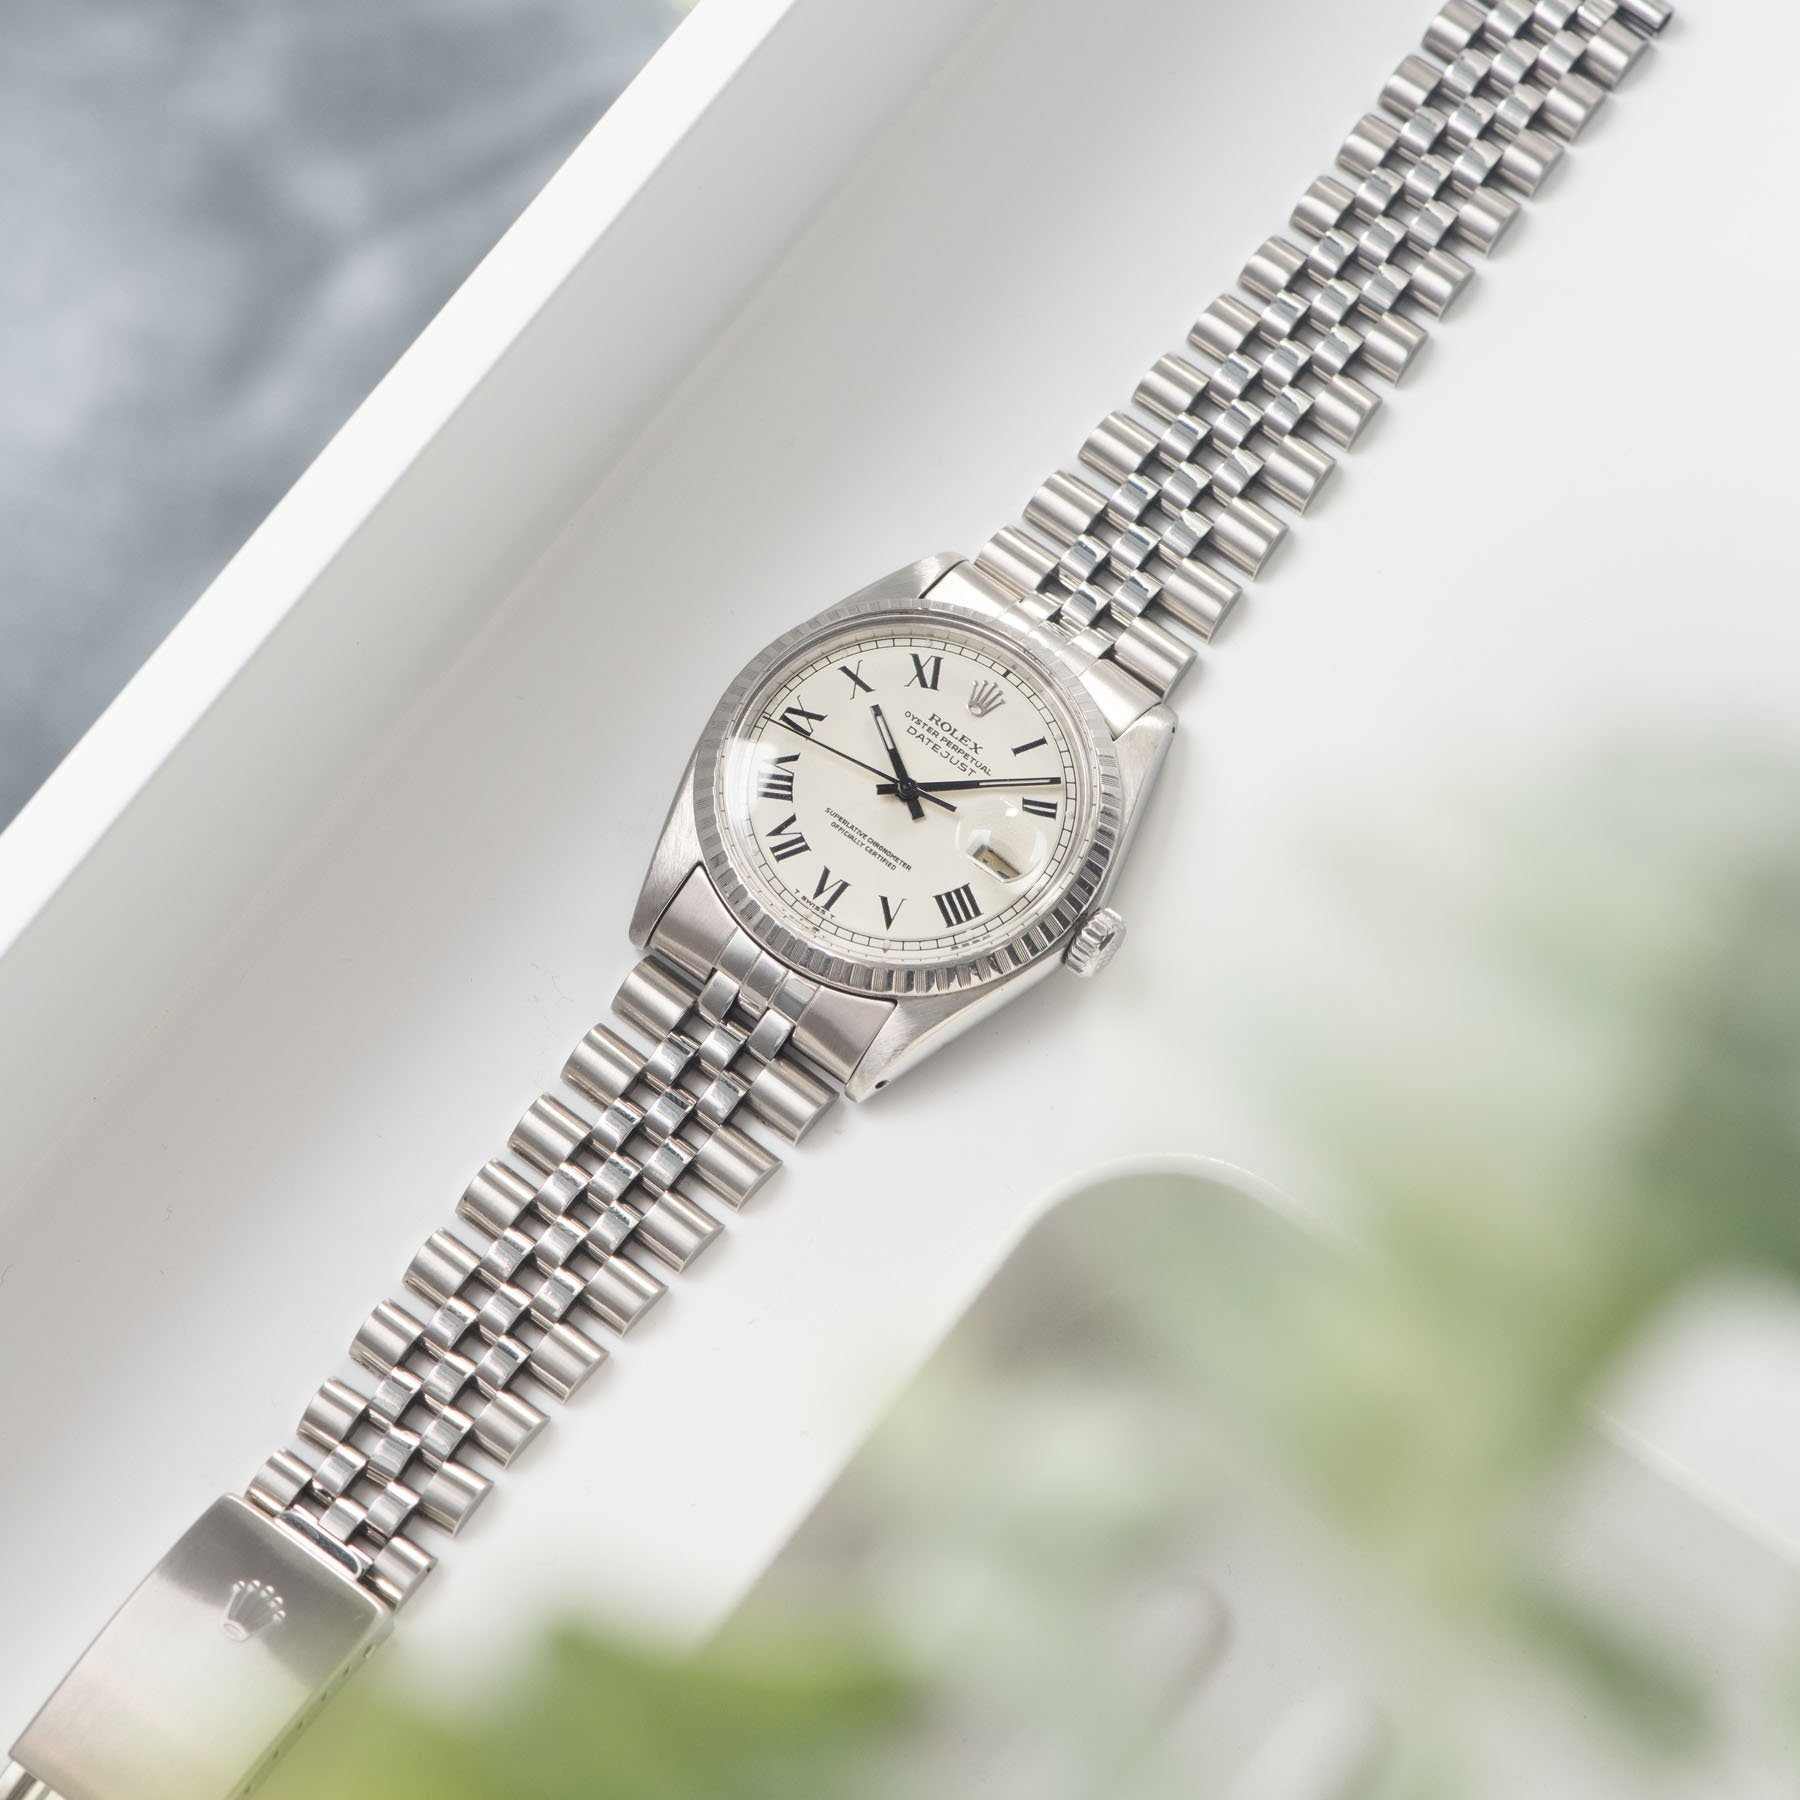 Rolex Datejust Reference 1603 Cream Buckley Dial